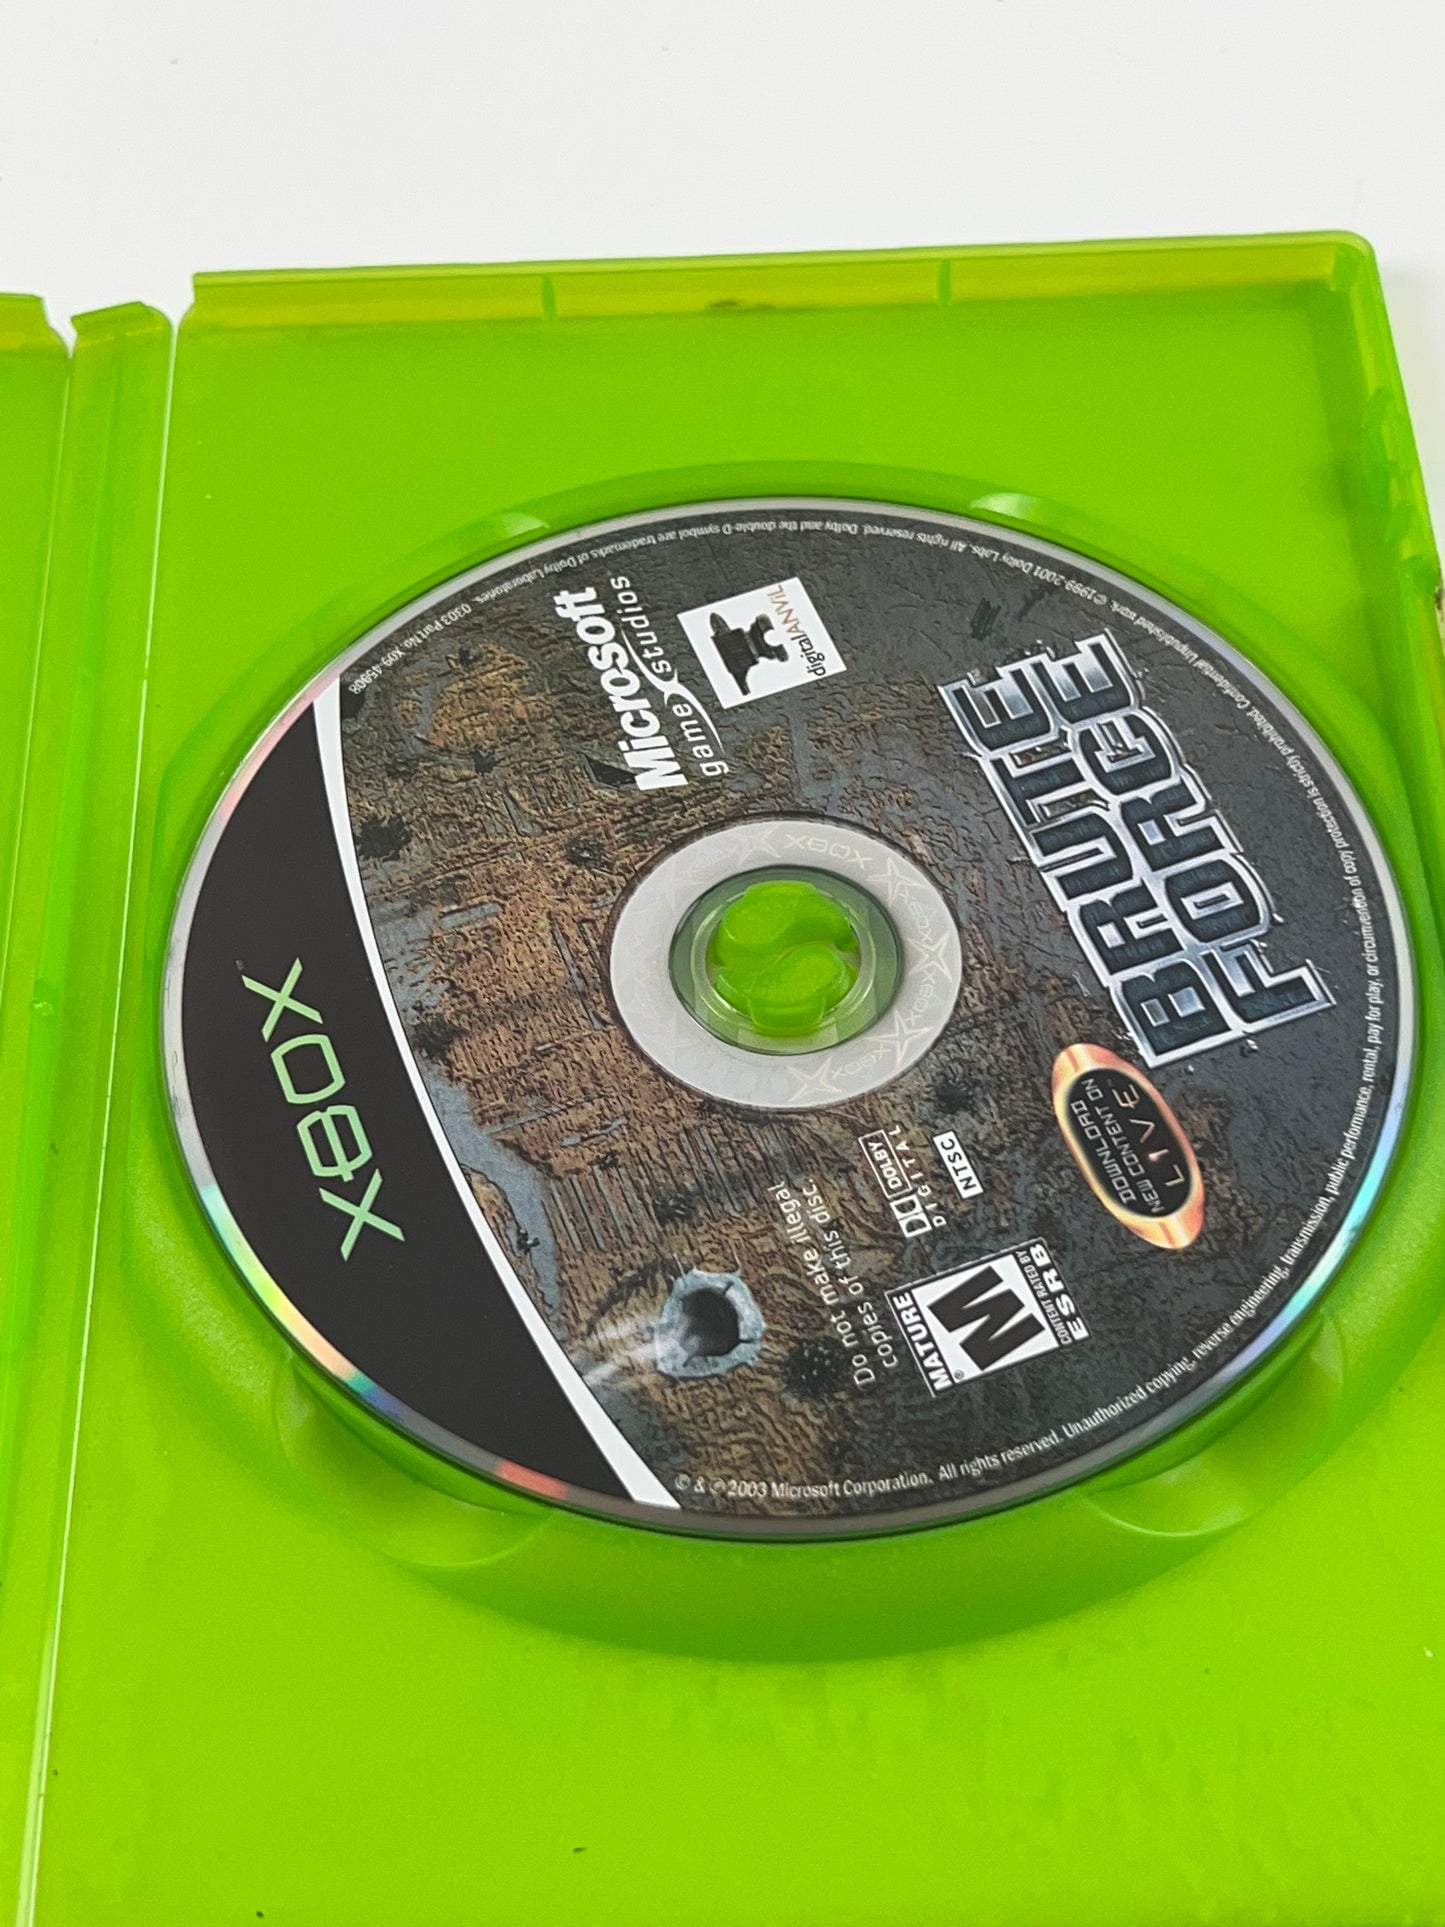 Brute Force (Microsoft Xbox, 2003) Disc & Case Only